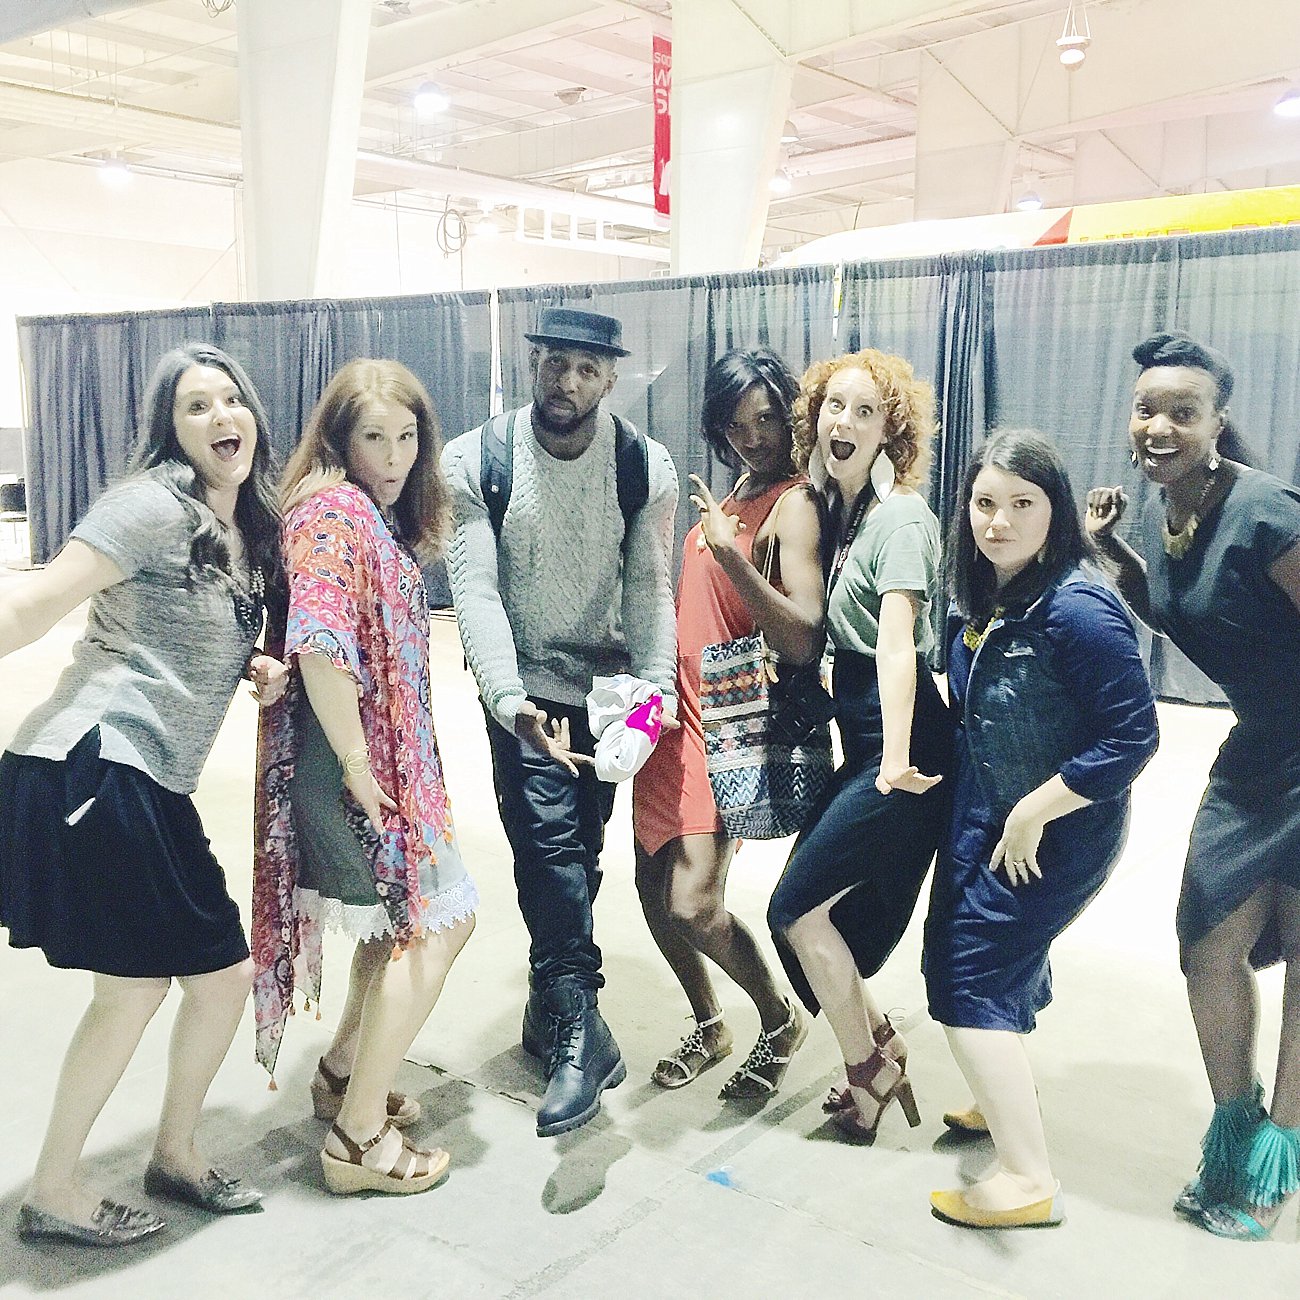 "Dressing with Purpose" Ethical Fashion Show at the Southern Women's Show in Raleigh, North Carolina 2016 | triFABB and Still Being Molly | North Carolina Fashion & Style Blogger (8)